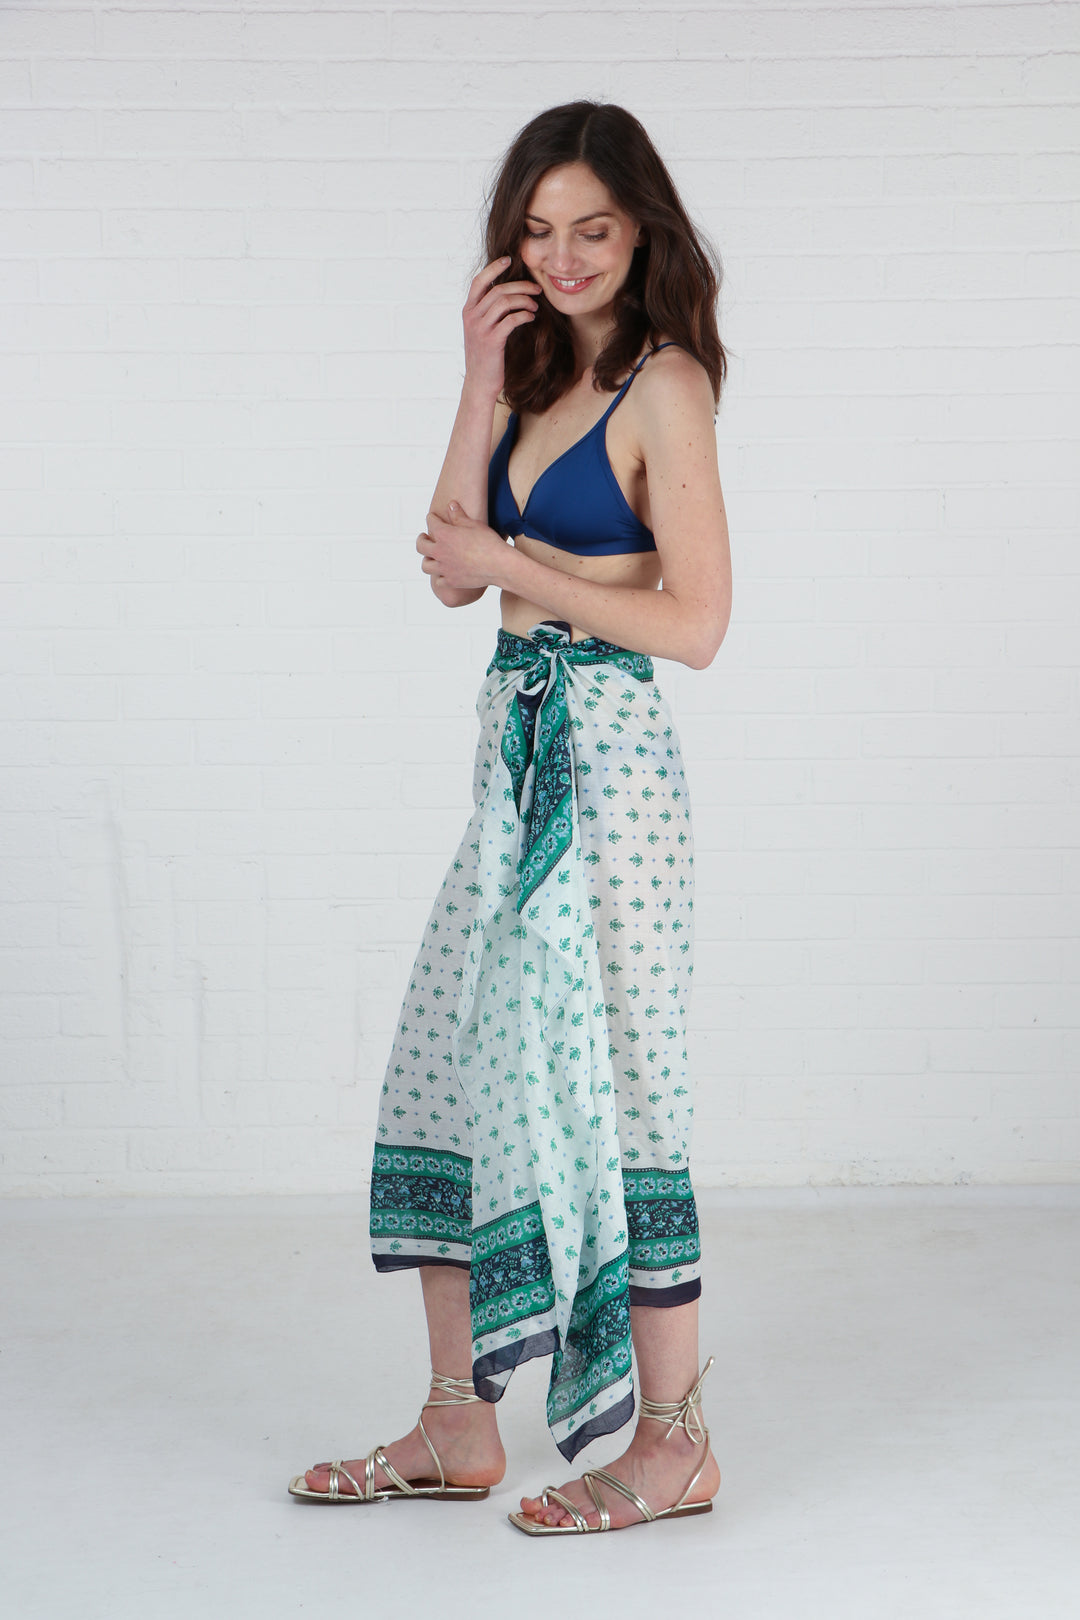 green floral scarf being worn as a beach cover up sarong